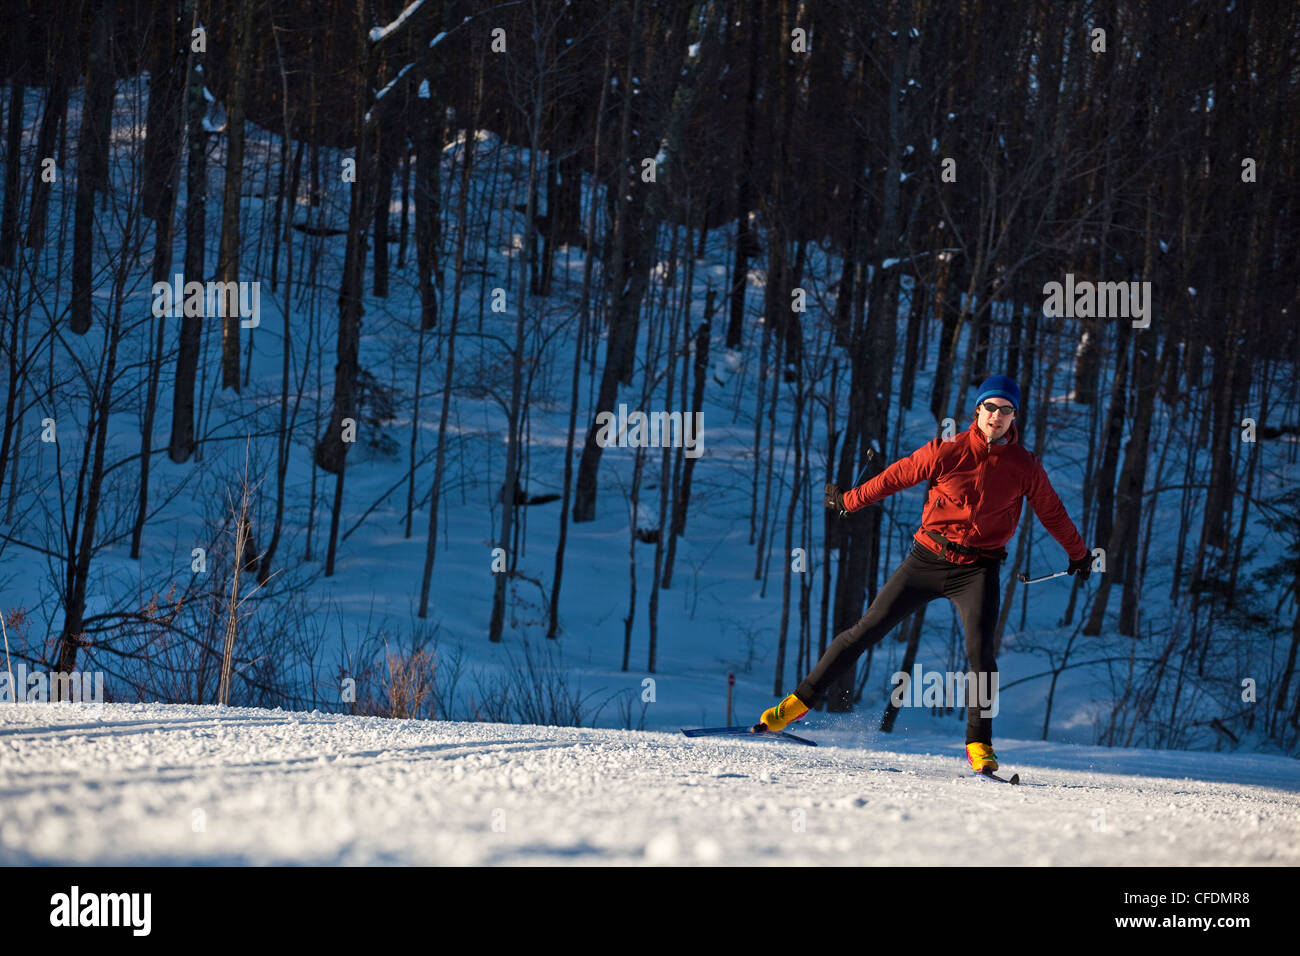 A man crosscountry skiing at Mt Orford, Quebec, Canada Stock Photo